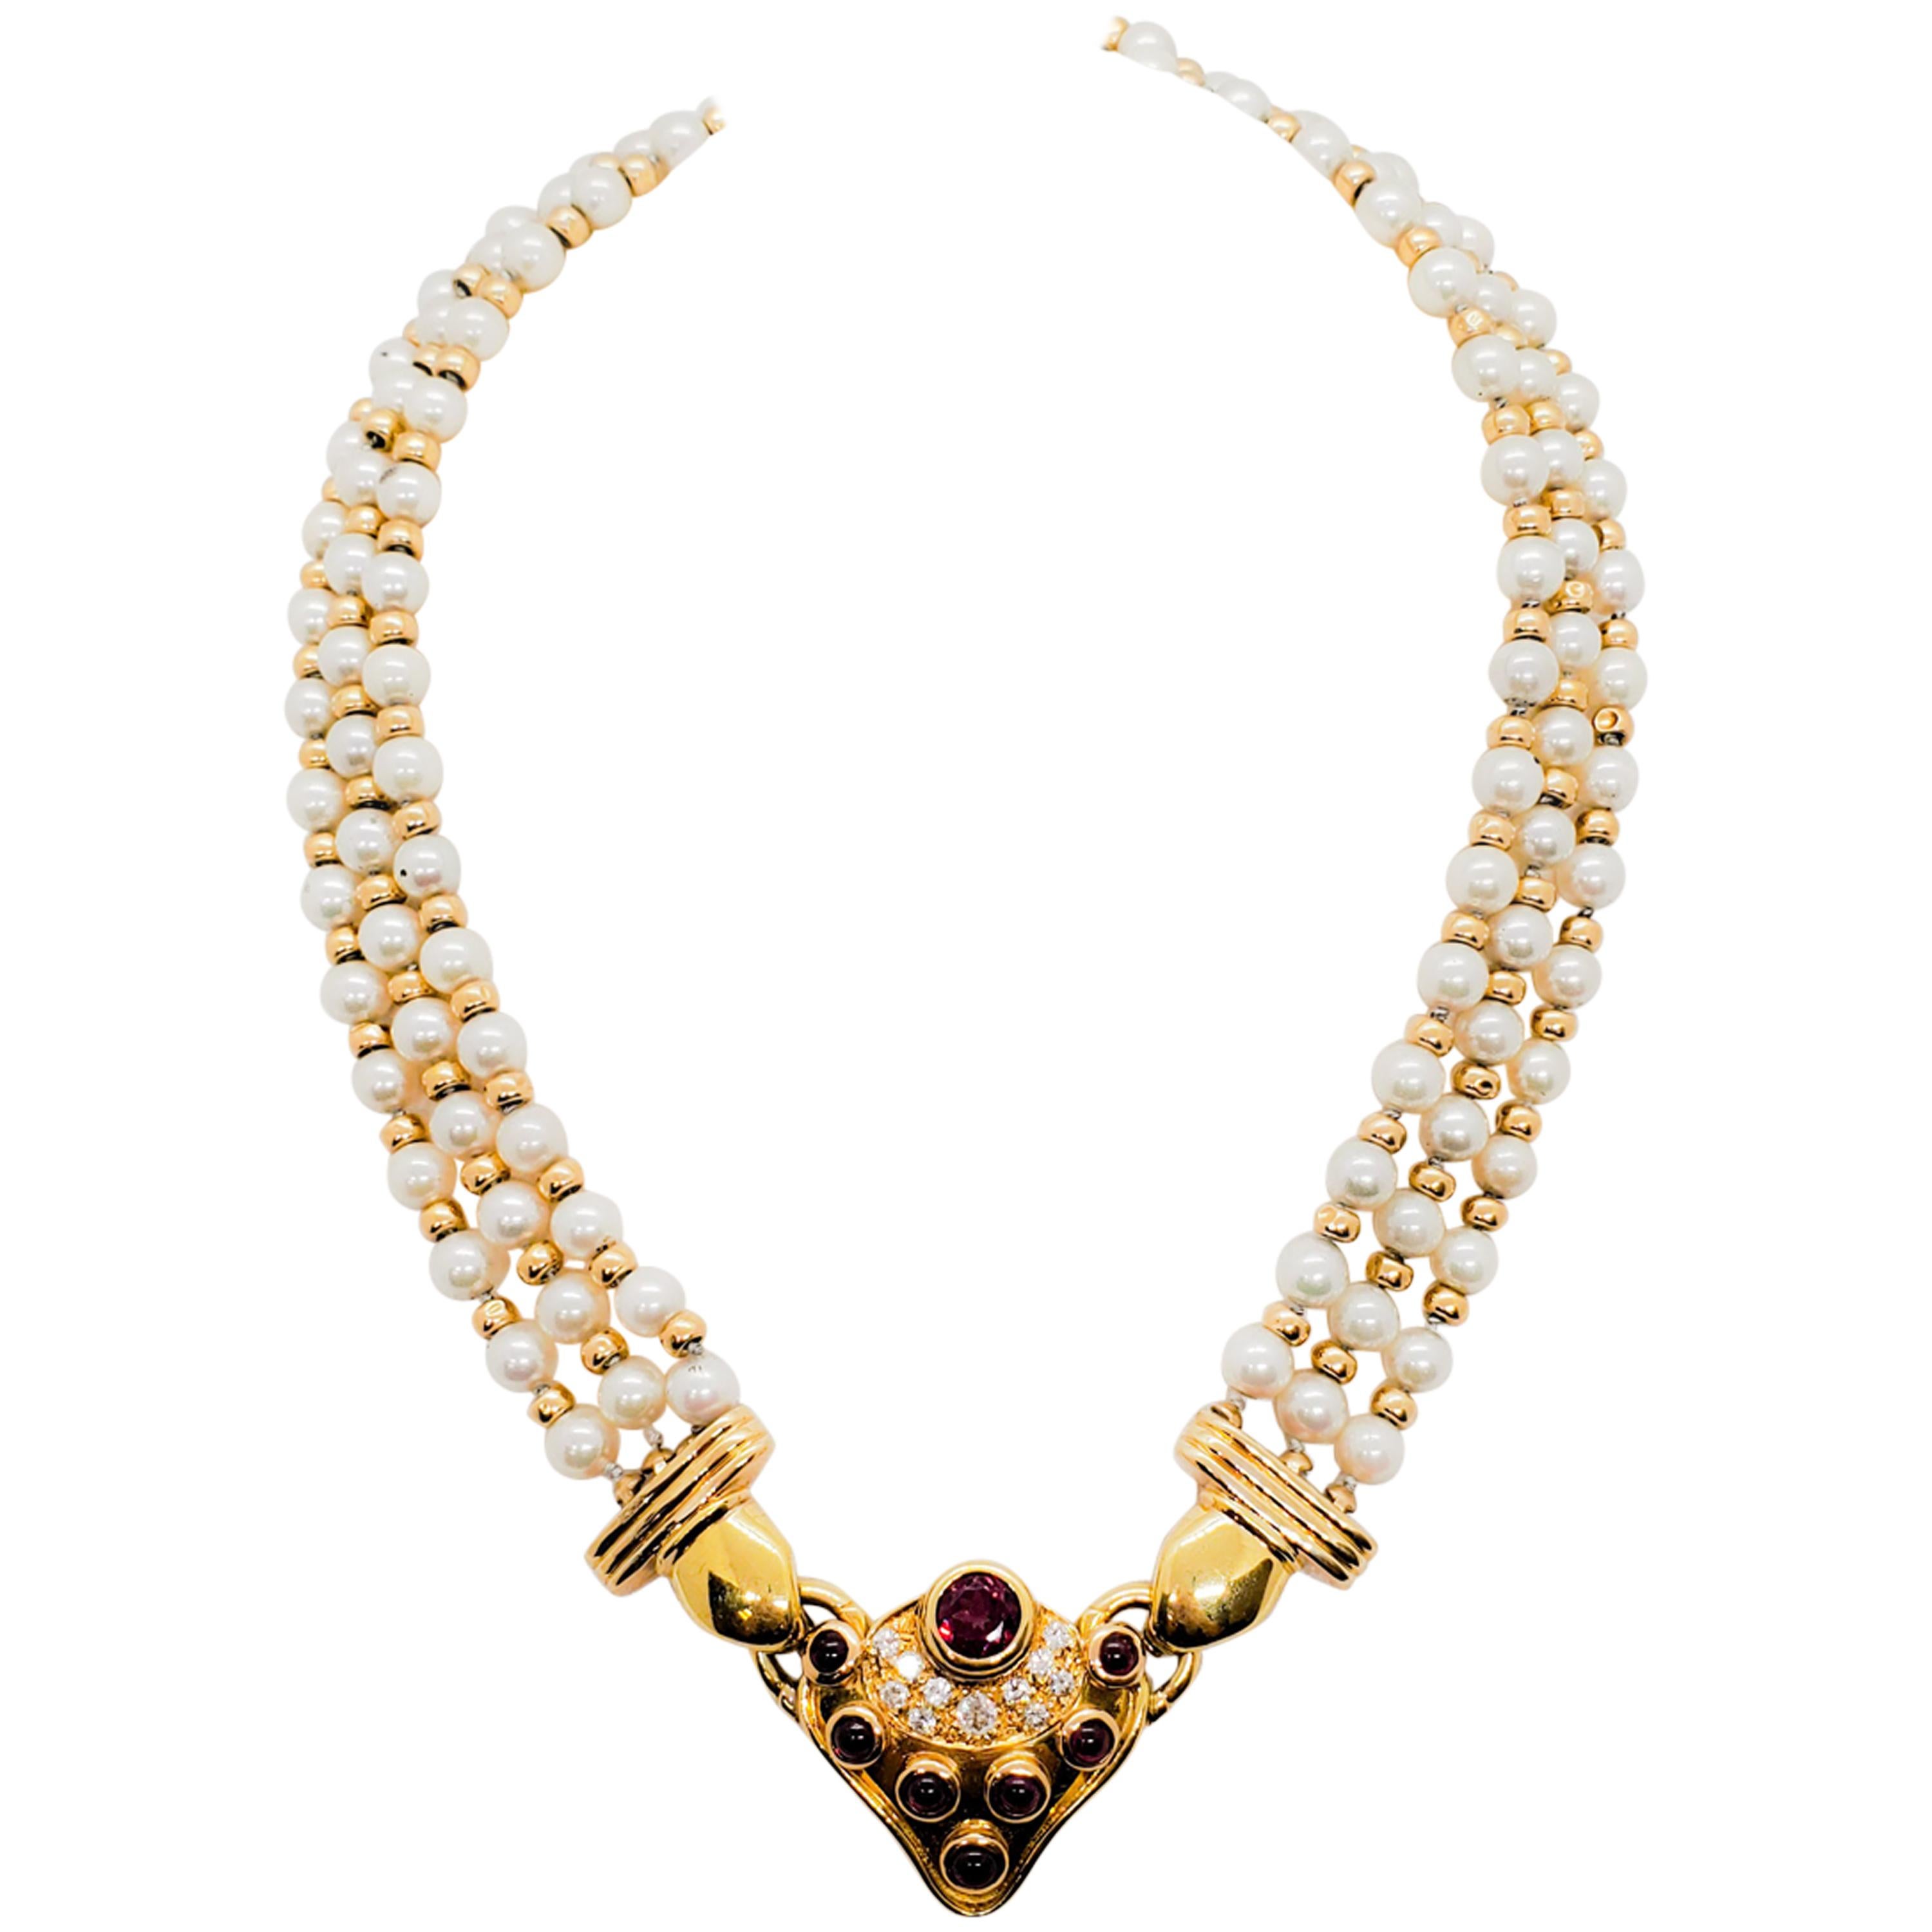 White Round Pearl, Red Tourmaline, and Diamond Necklace in 18 Karat Yellow Gold